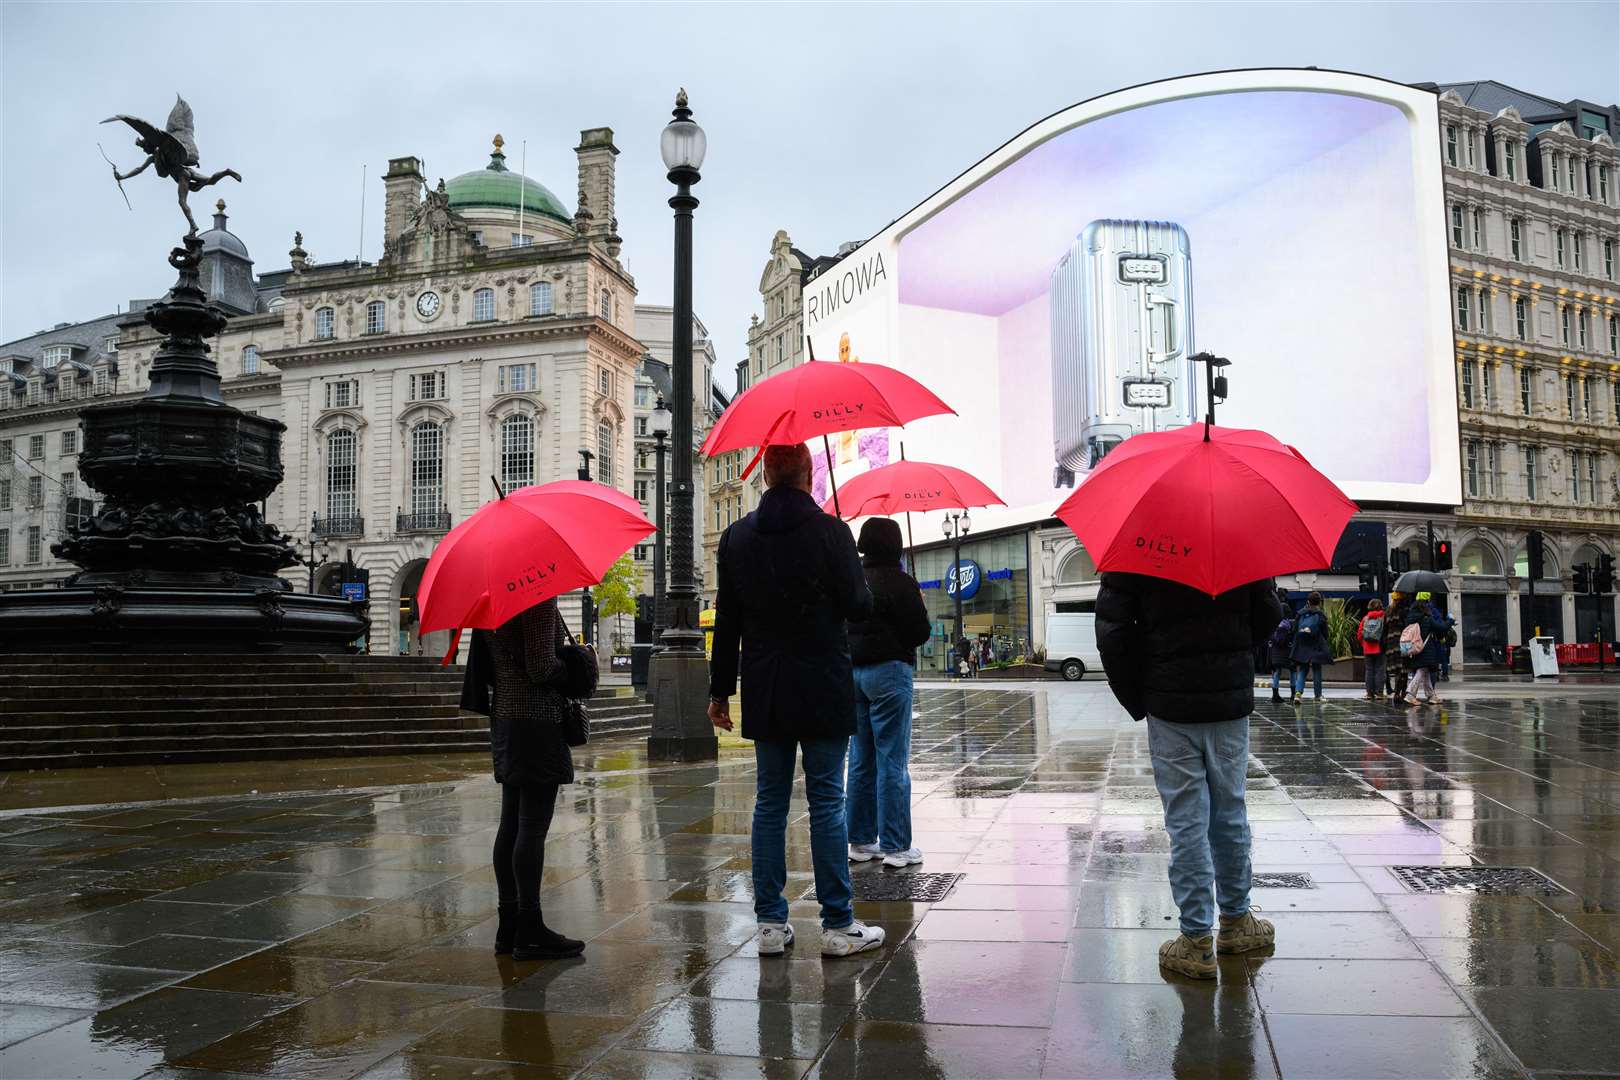 The Met Office has warned that a spell of heavy rainfall could affect travel and create possible flooding.